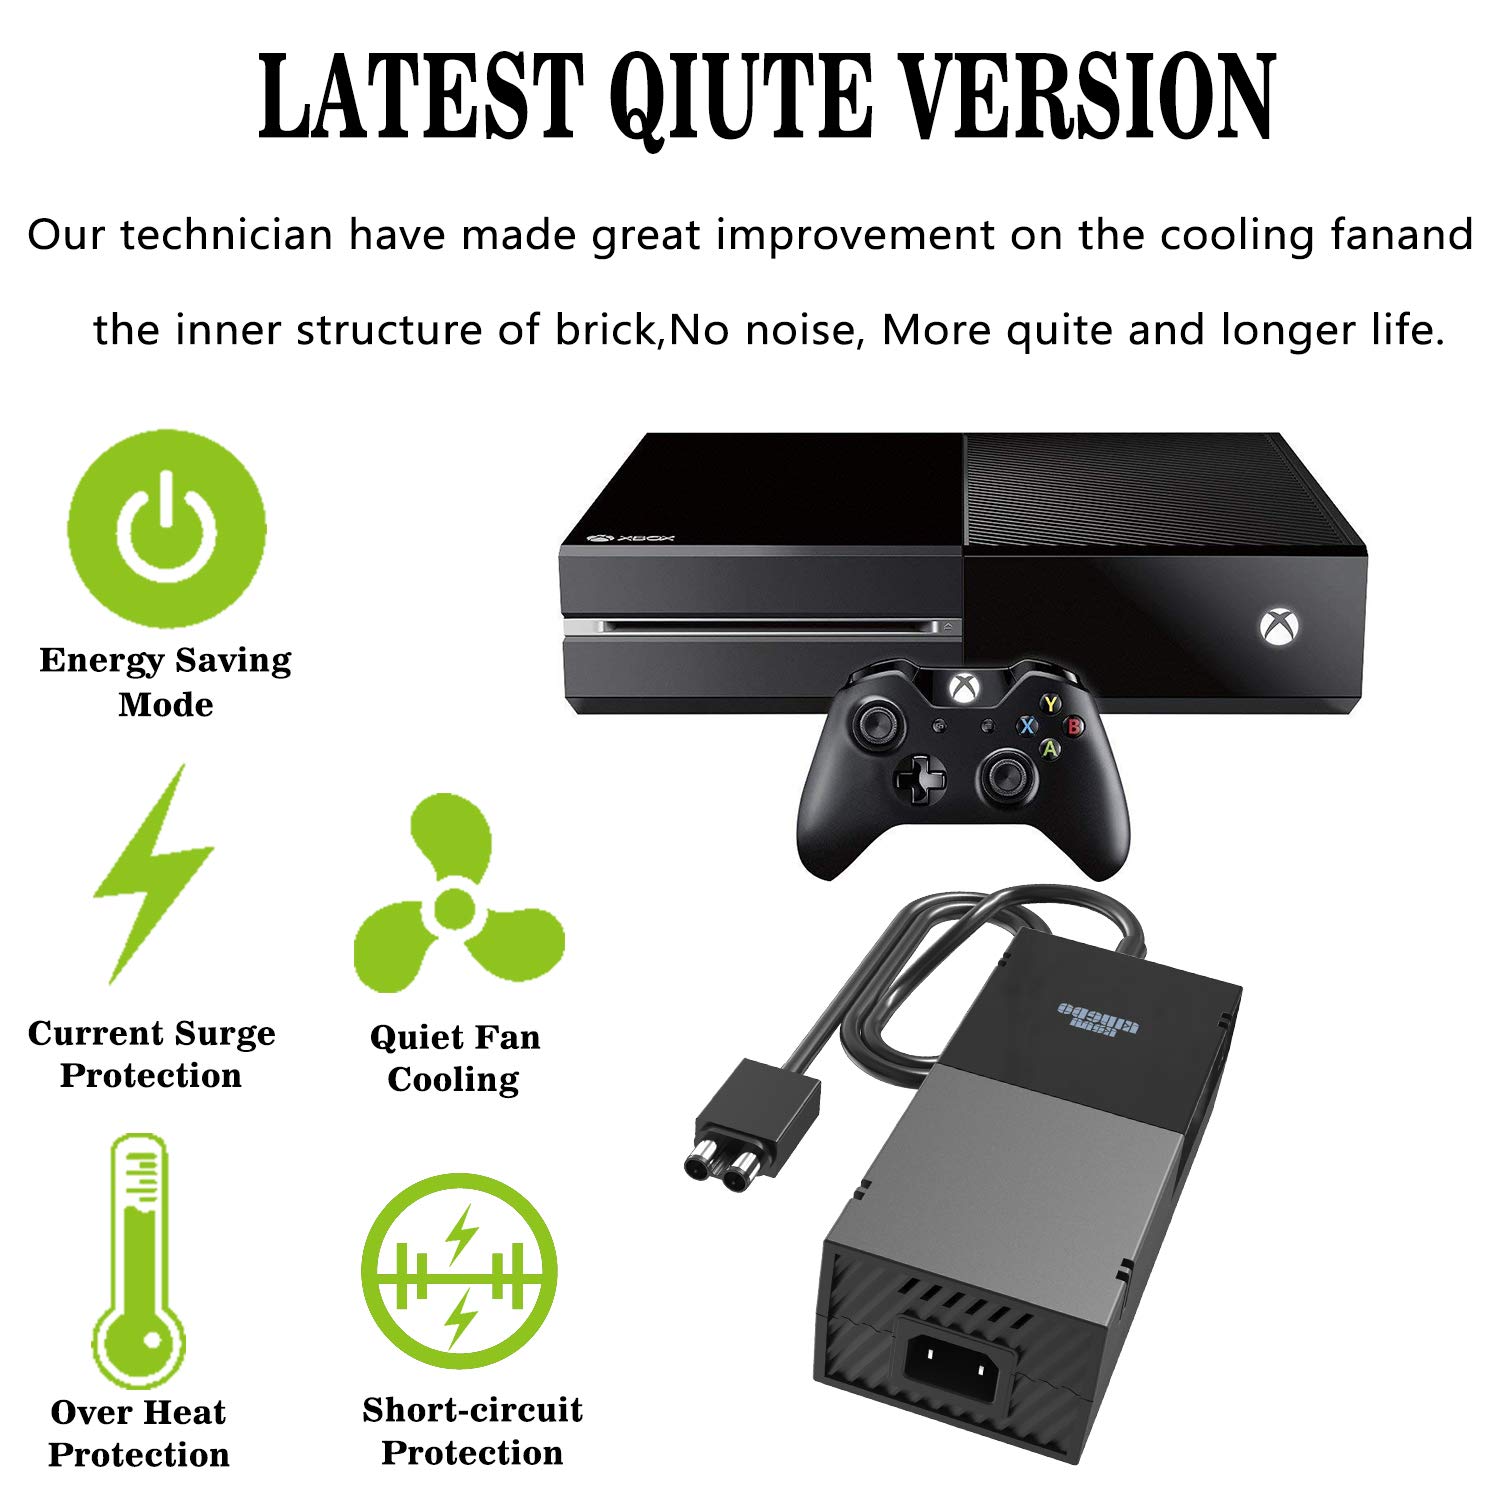 Power Brick Compatible with Xbox One Power Supply Brick for Xbox One, KSW KINGDO Power Supply for Microsoft Xbox one [Sole Newest Quietest Version]